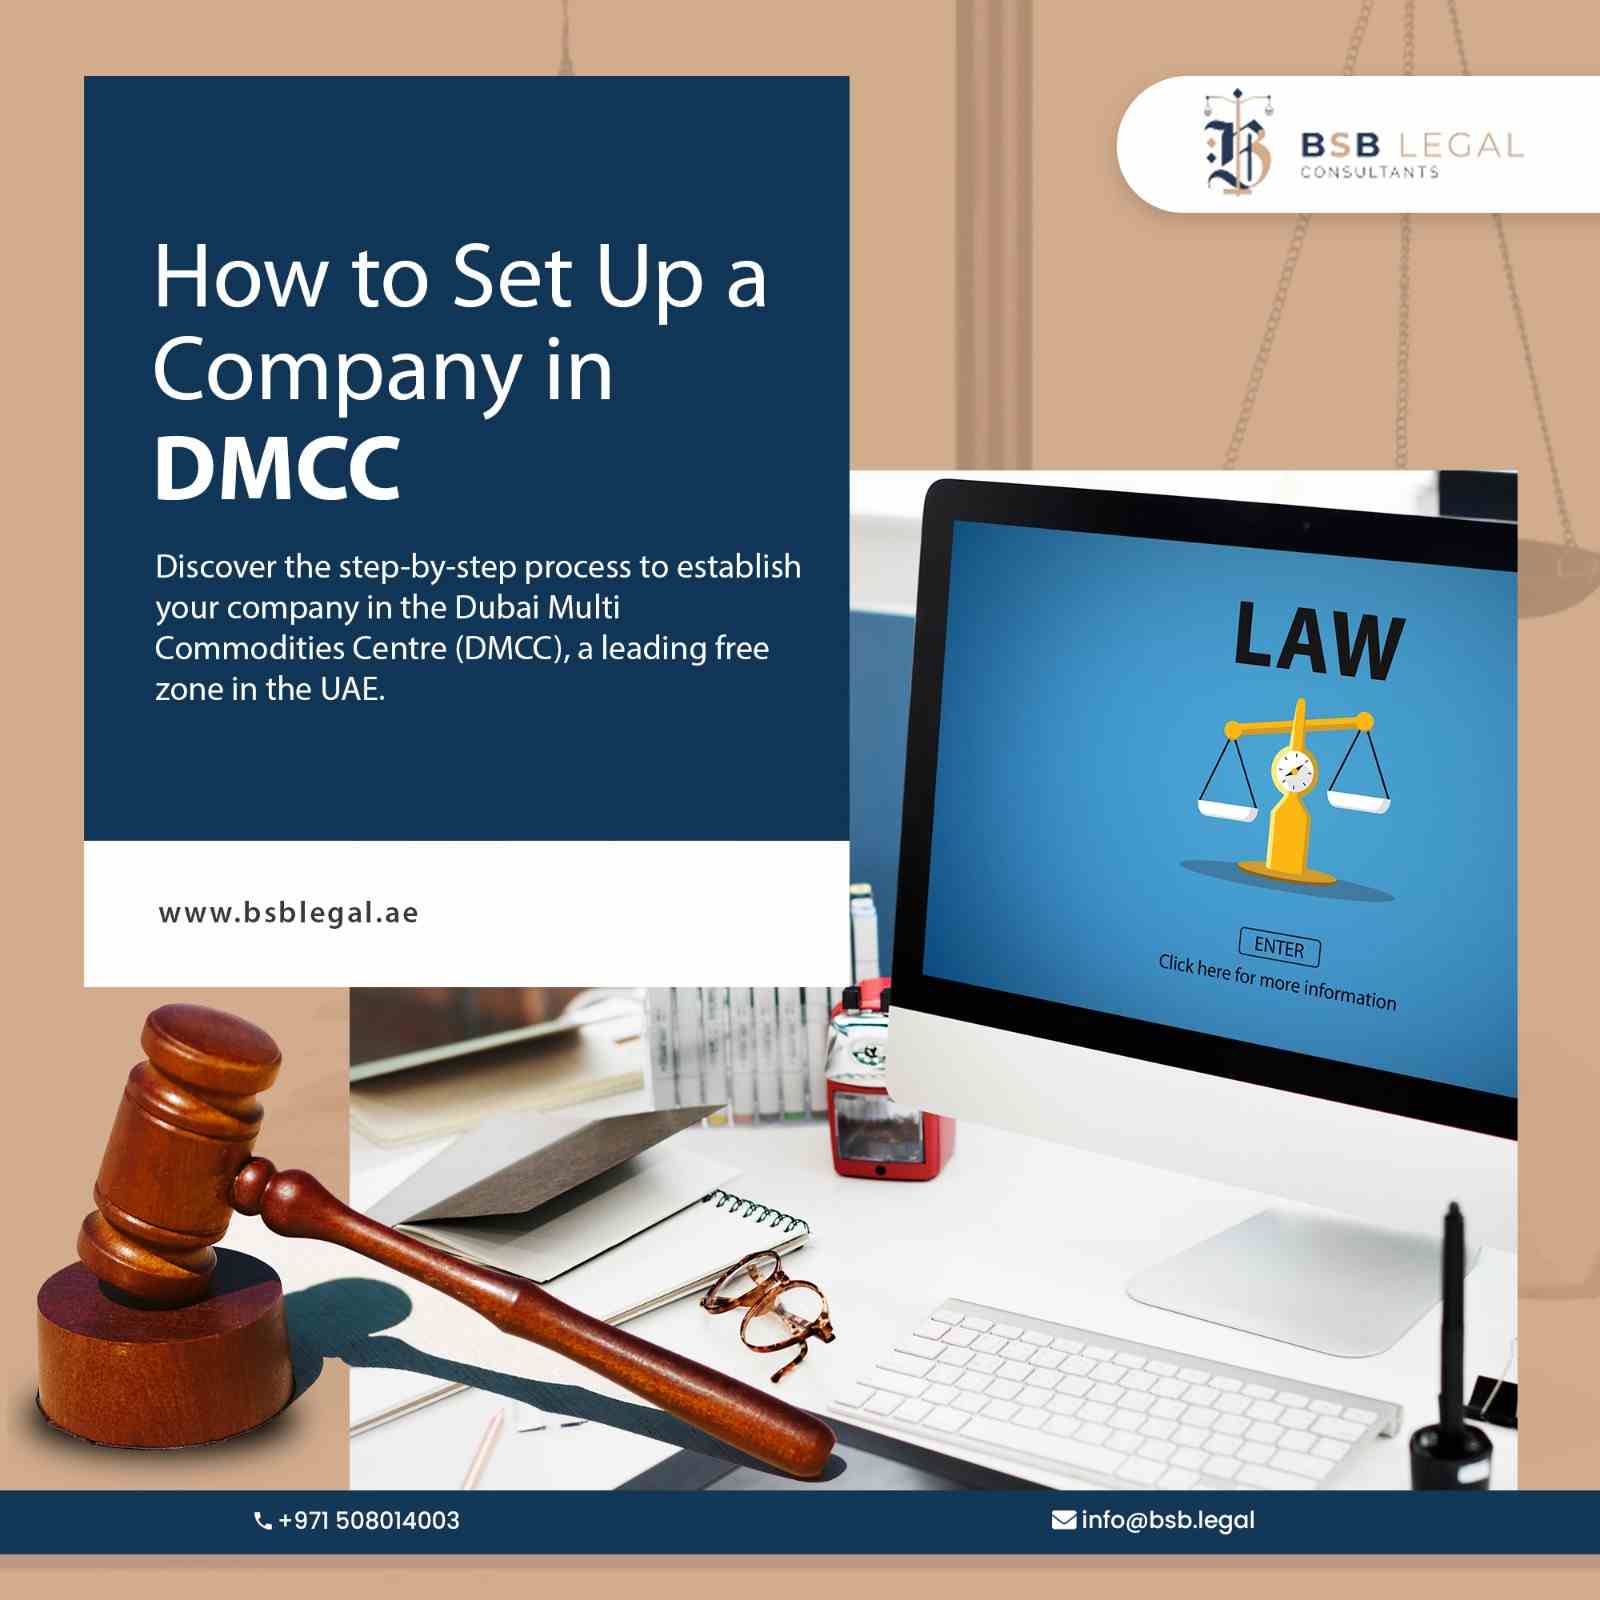 How to Set Up a Company in DMCC